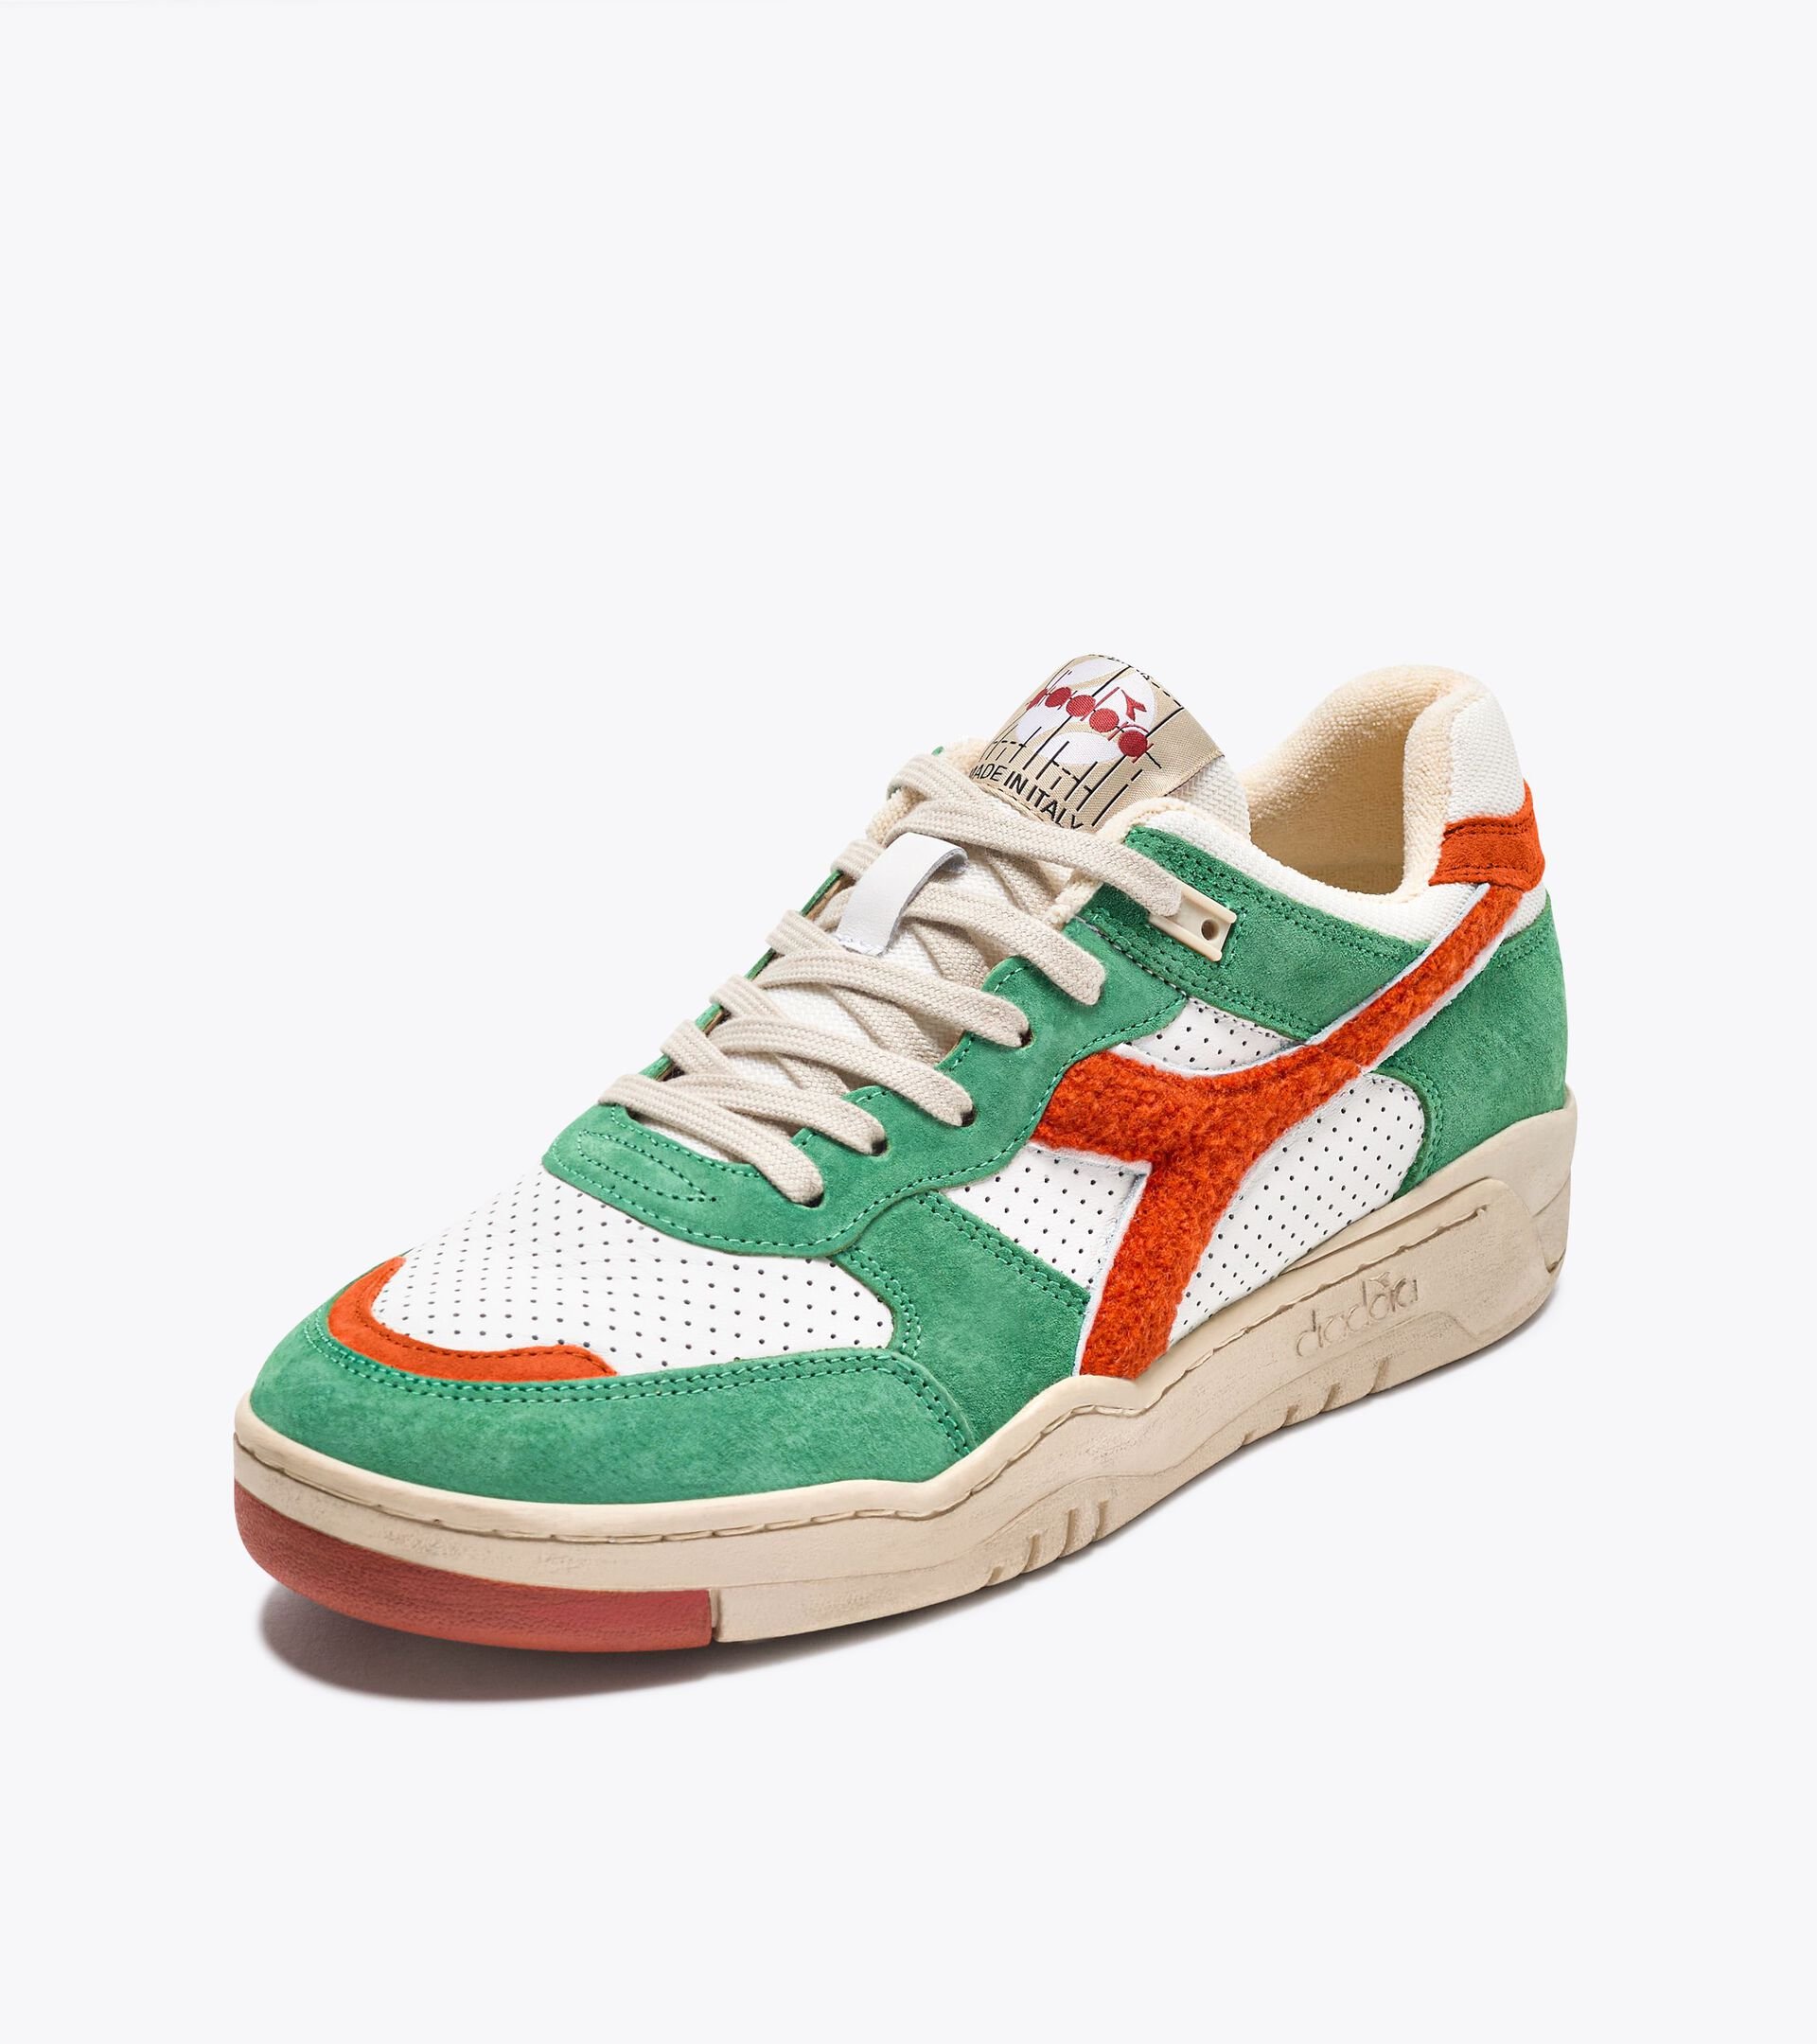 Heritage sneakers - Made in Italy - Gender Neutral B.560 USED RR ITALIA COOKED BROWN - Diadora